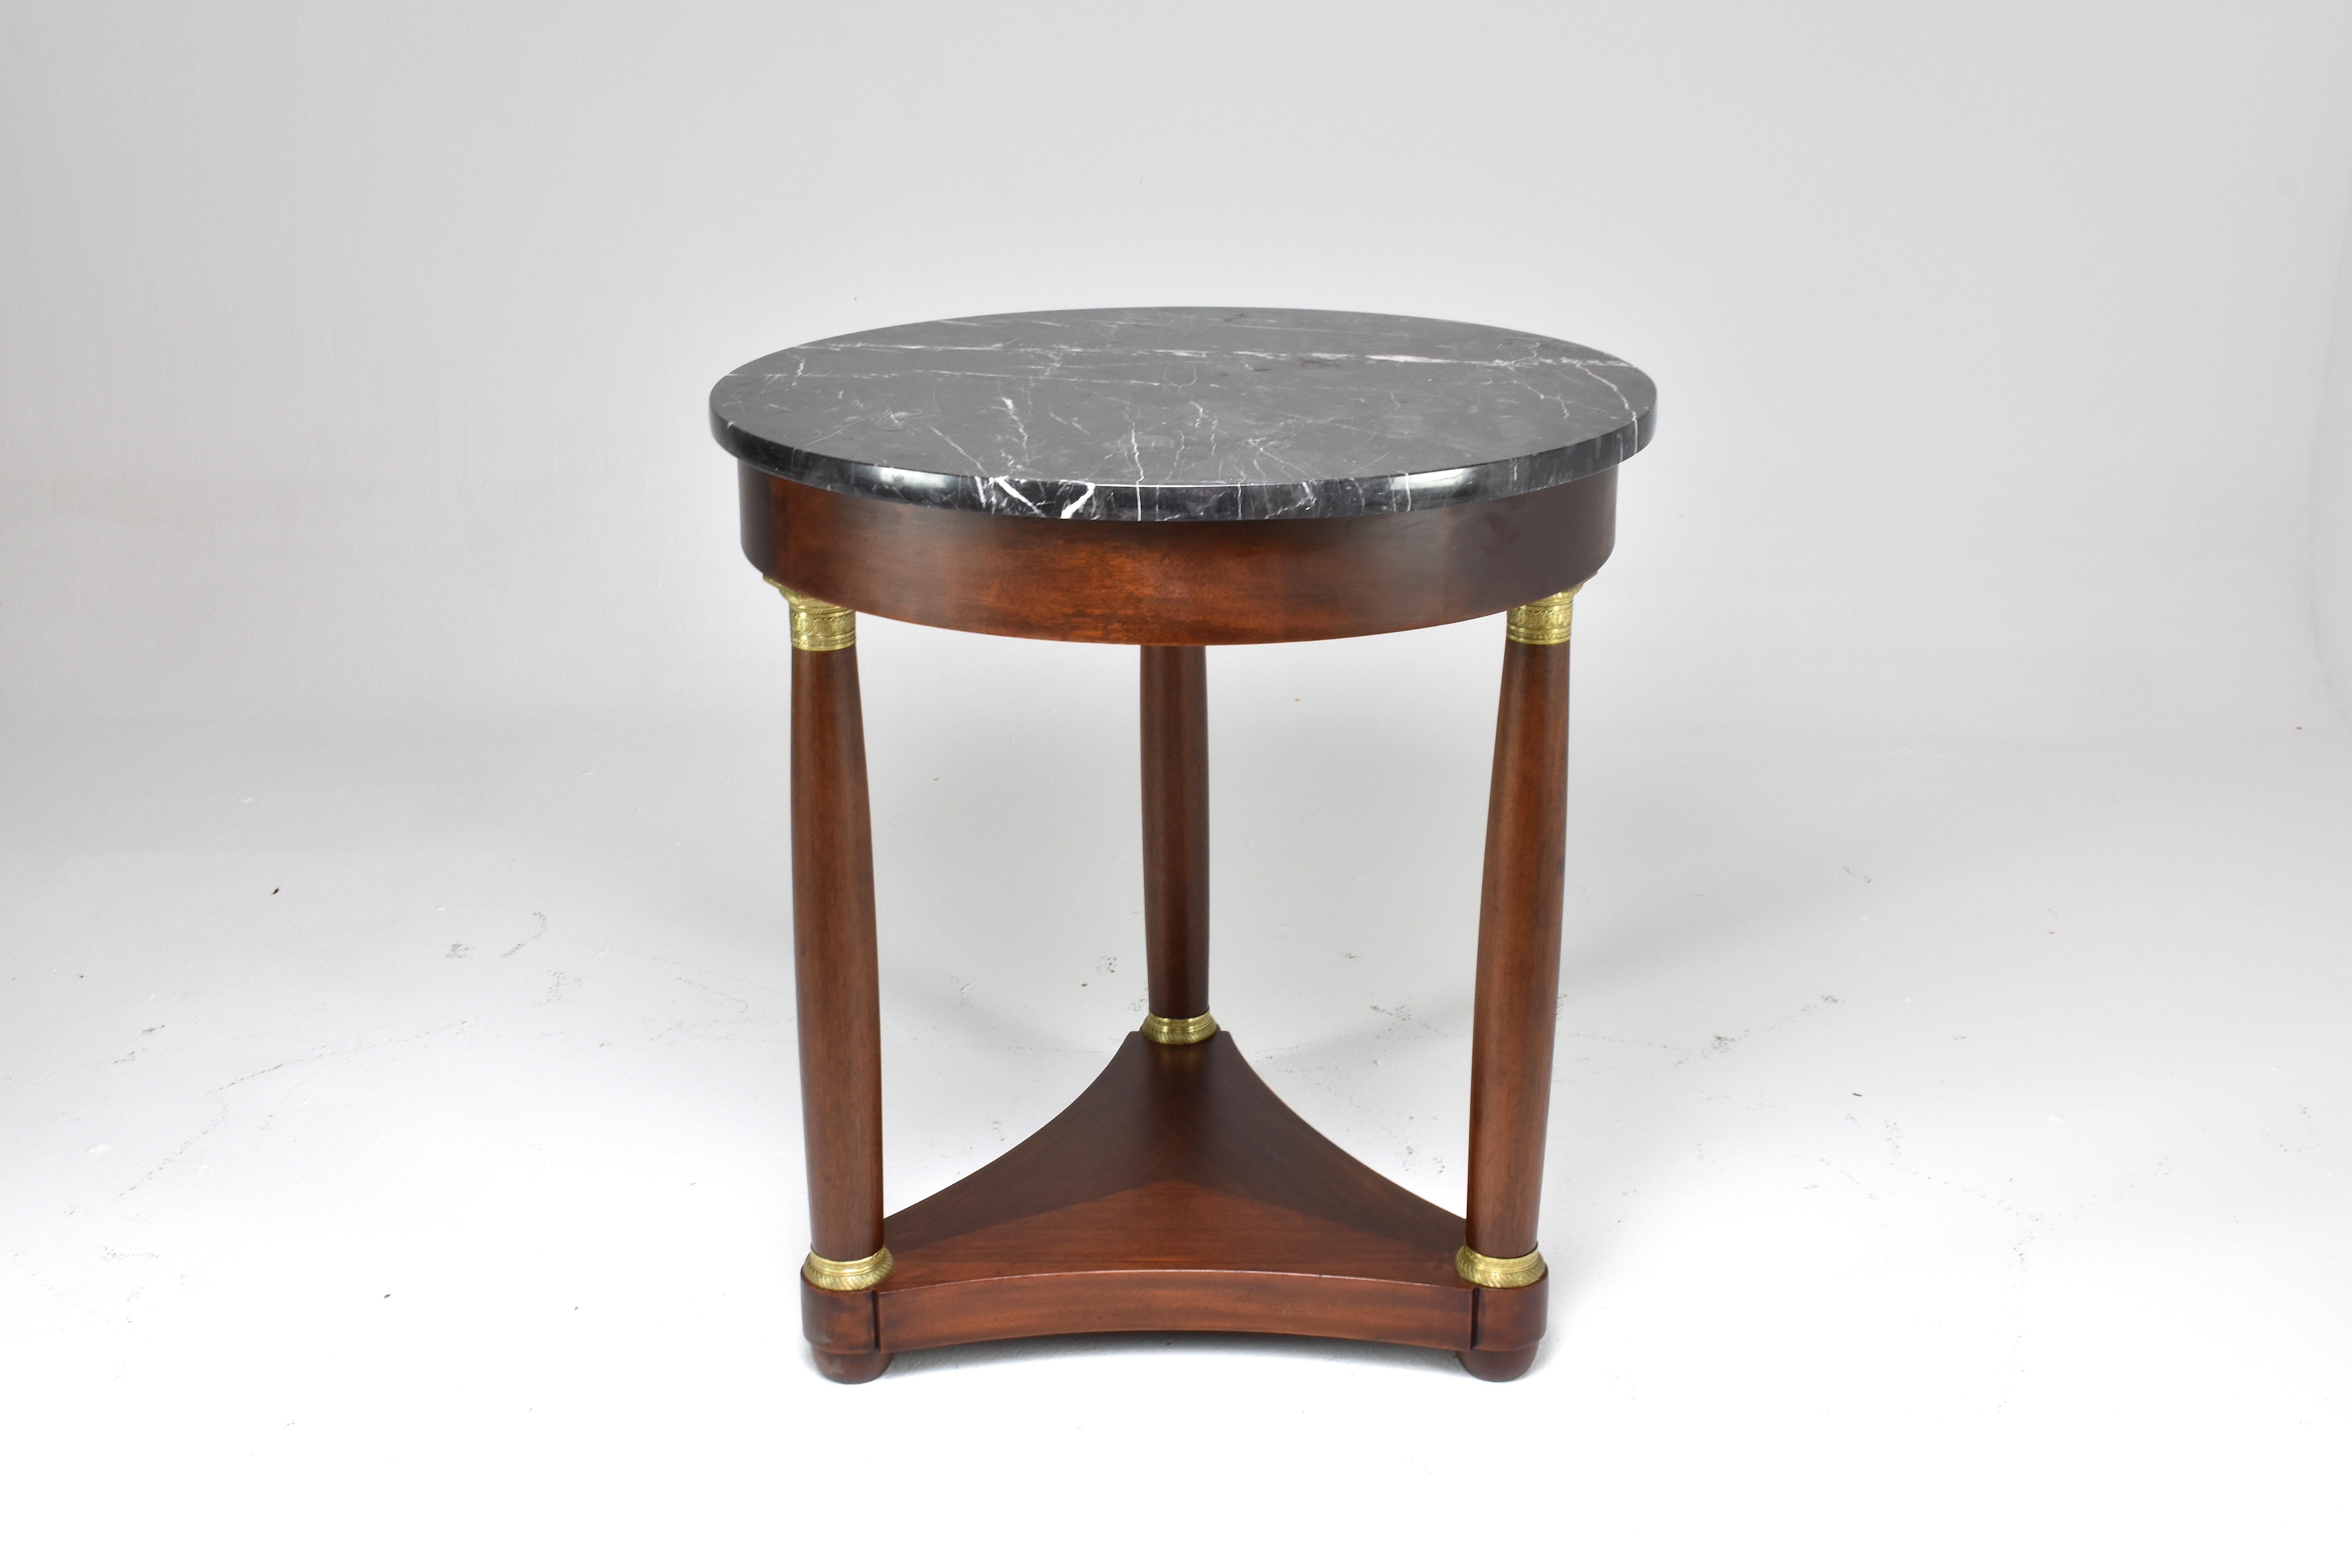 A chic antique pedestal table from the end of the 19th century period designed with tripod legs and hand-sculpted brass details. This beautiful French side table is composed of solid wood and has a black marble tabletop. 
This table can be placed